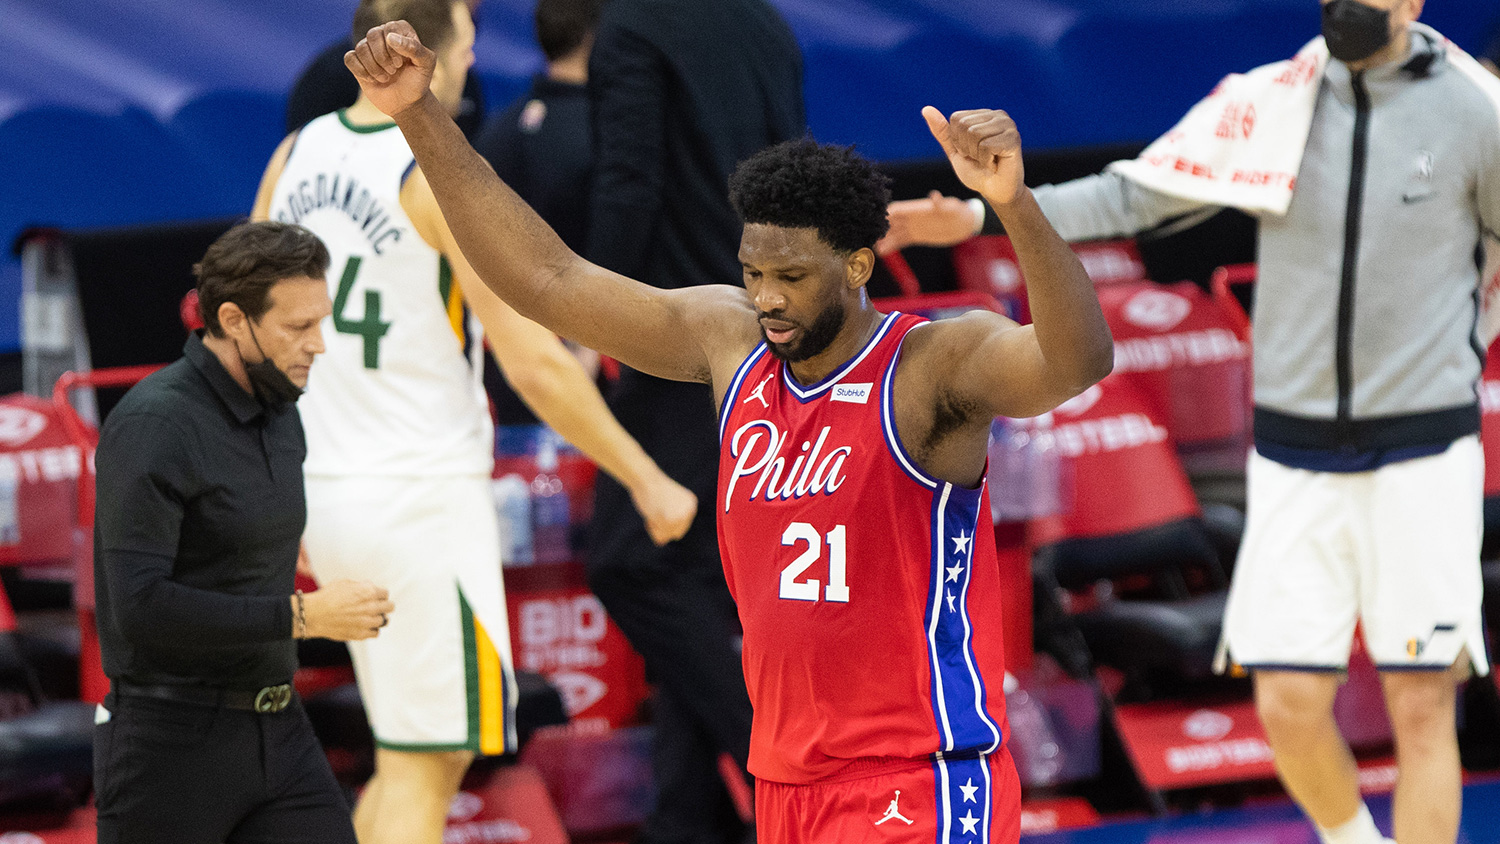 3 remarks after the incredible Joel Embiid led Sixers to a dramatic OT win